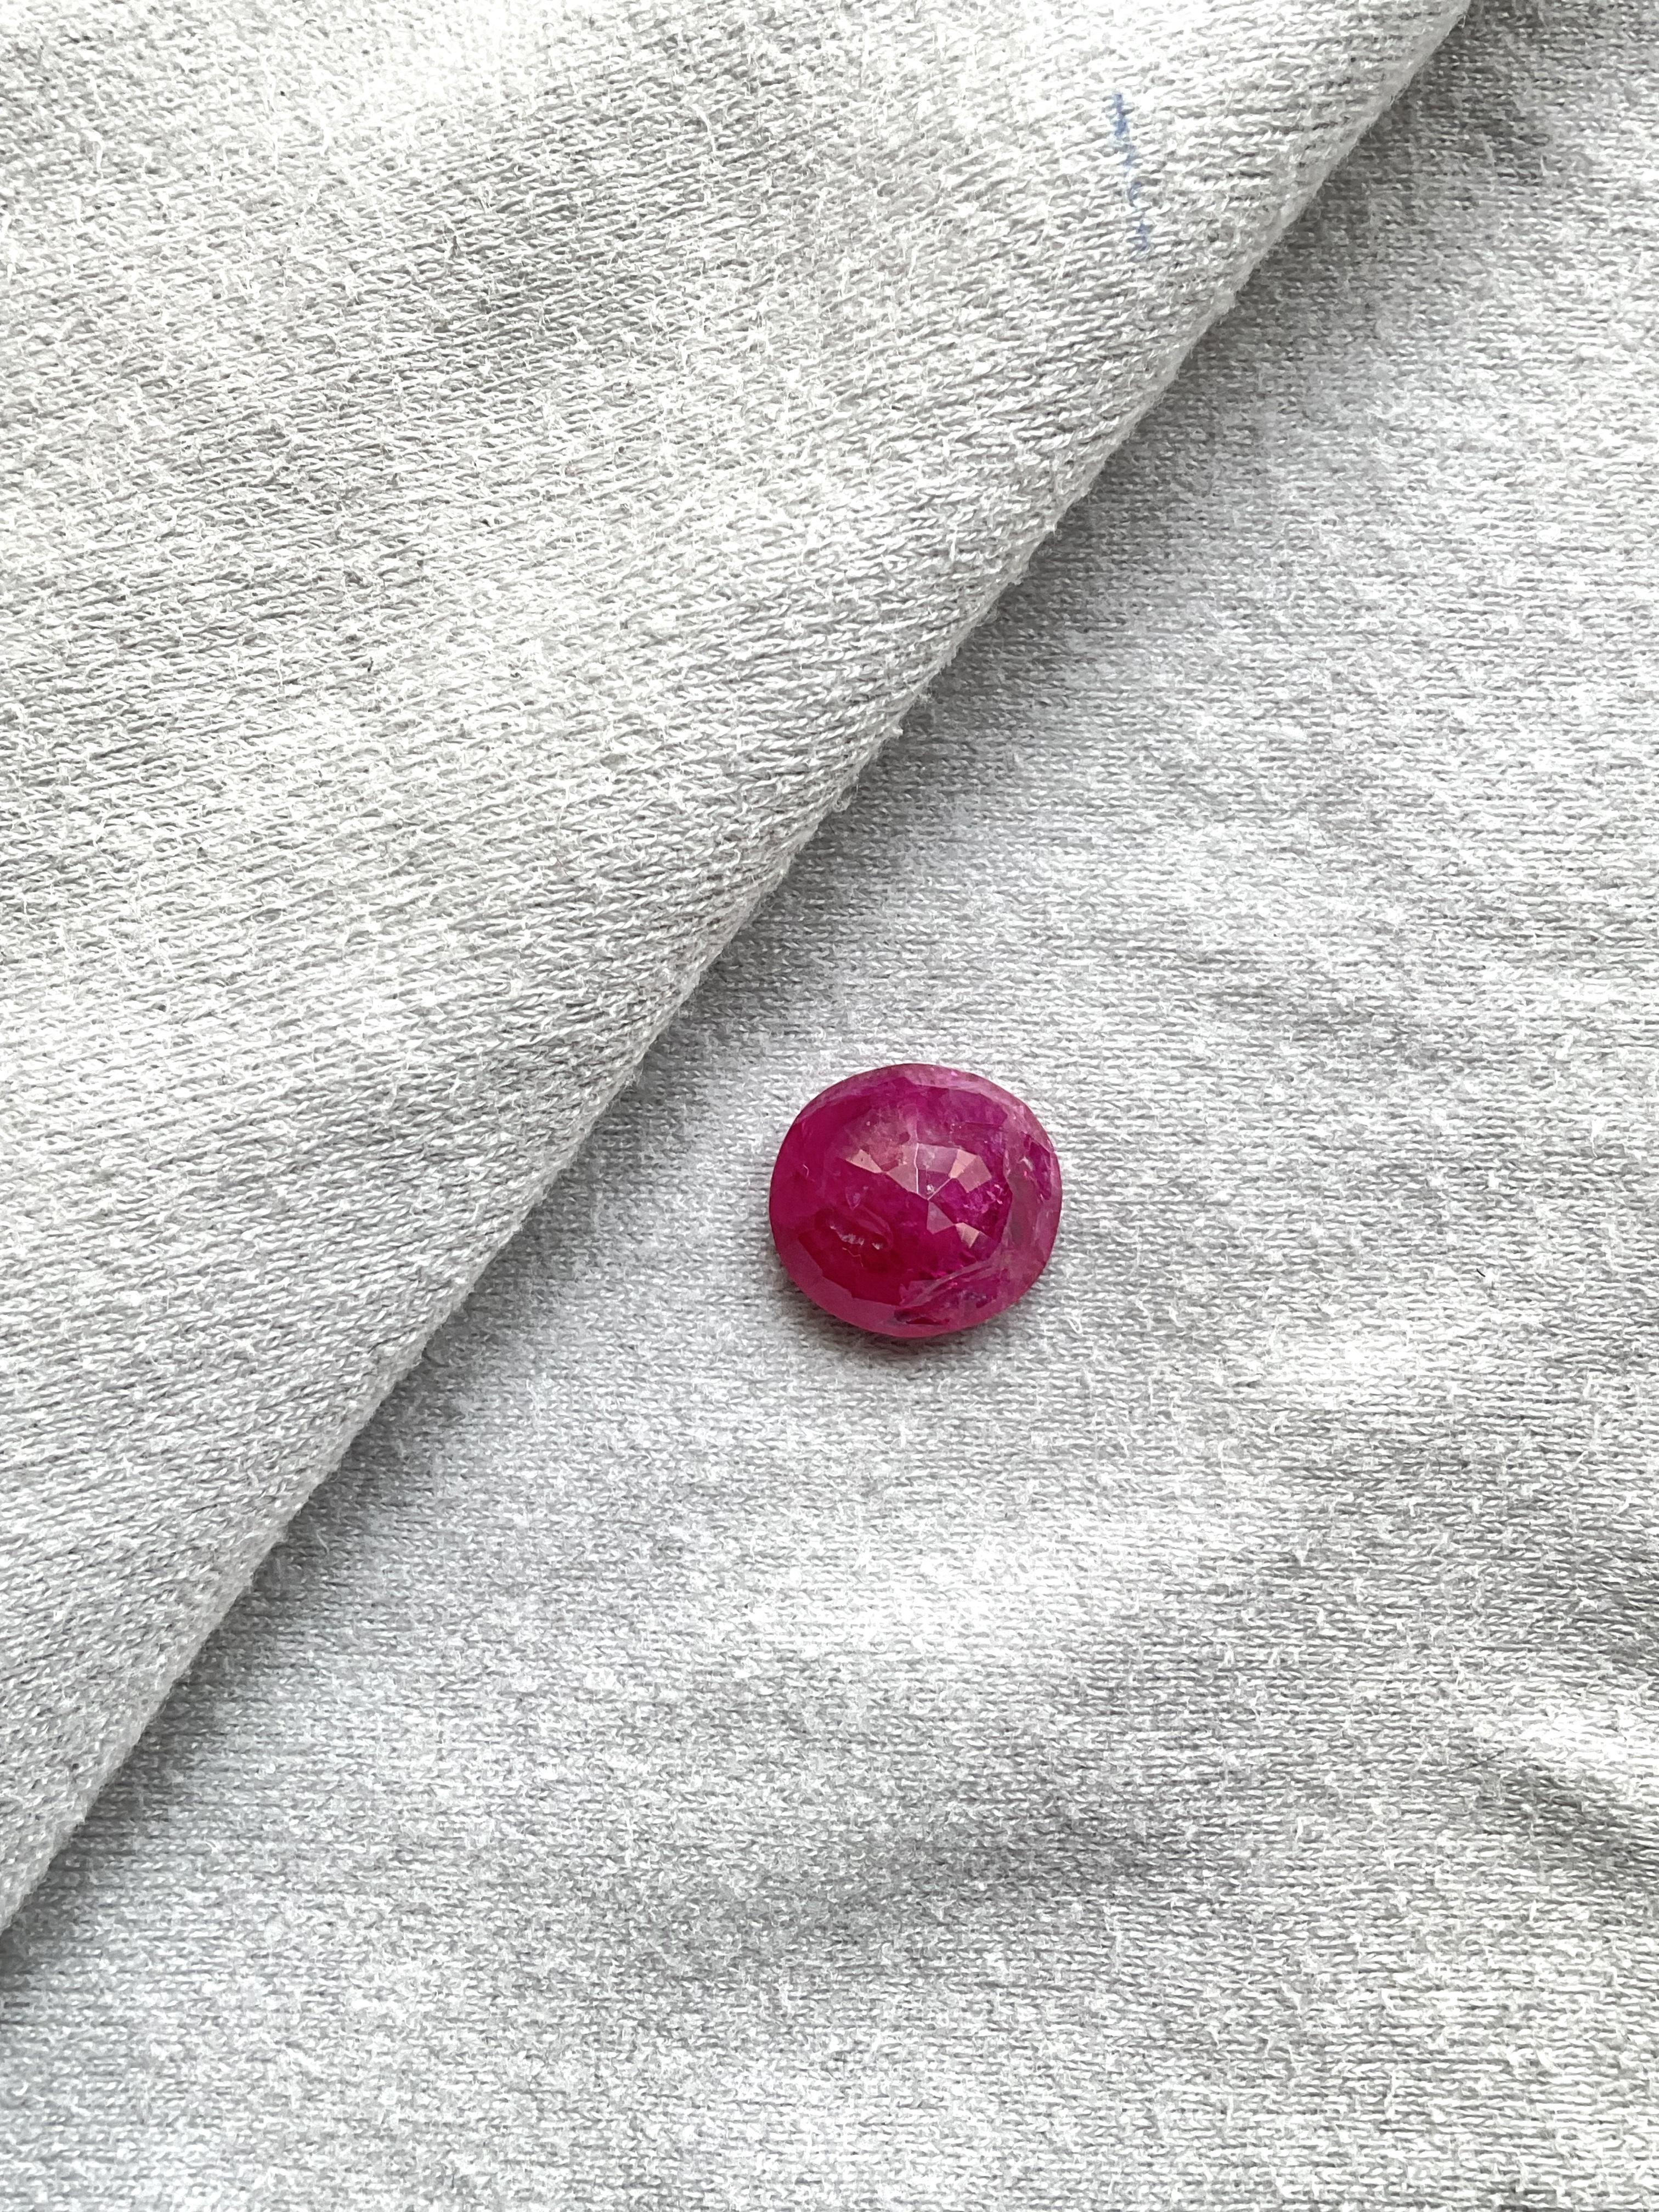 how much is a burmese ruby worth